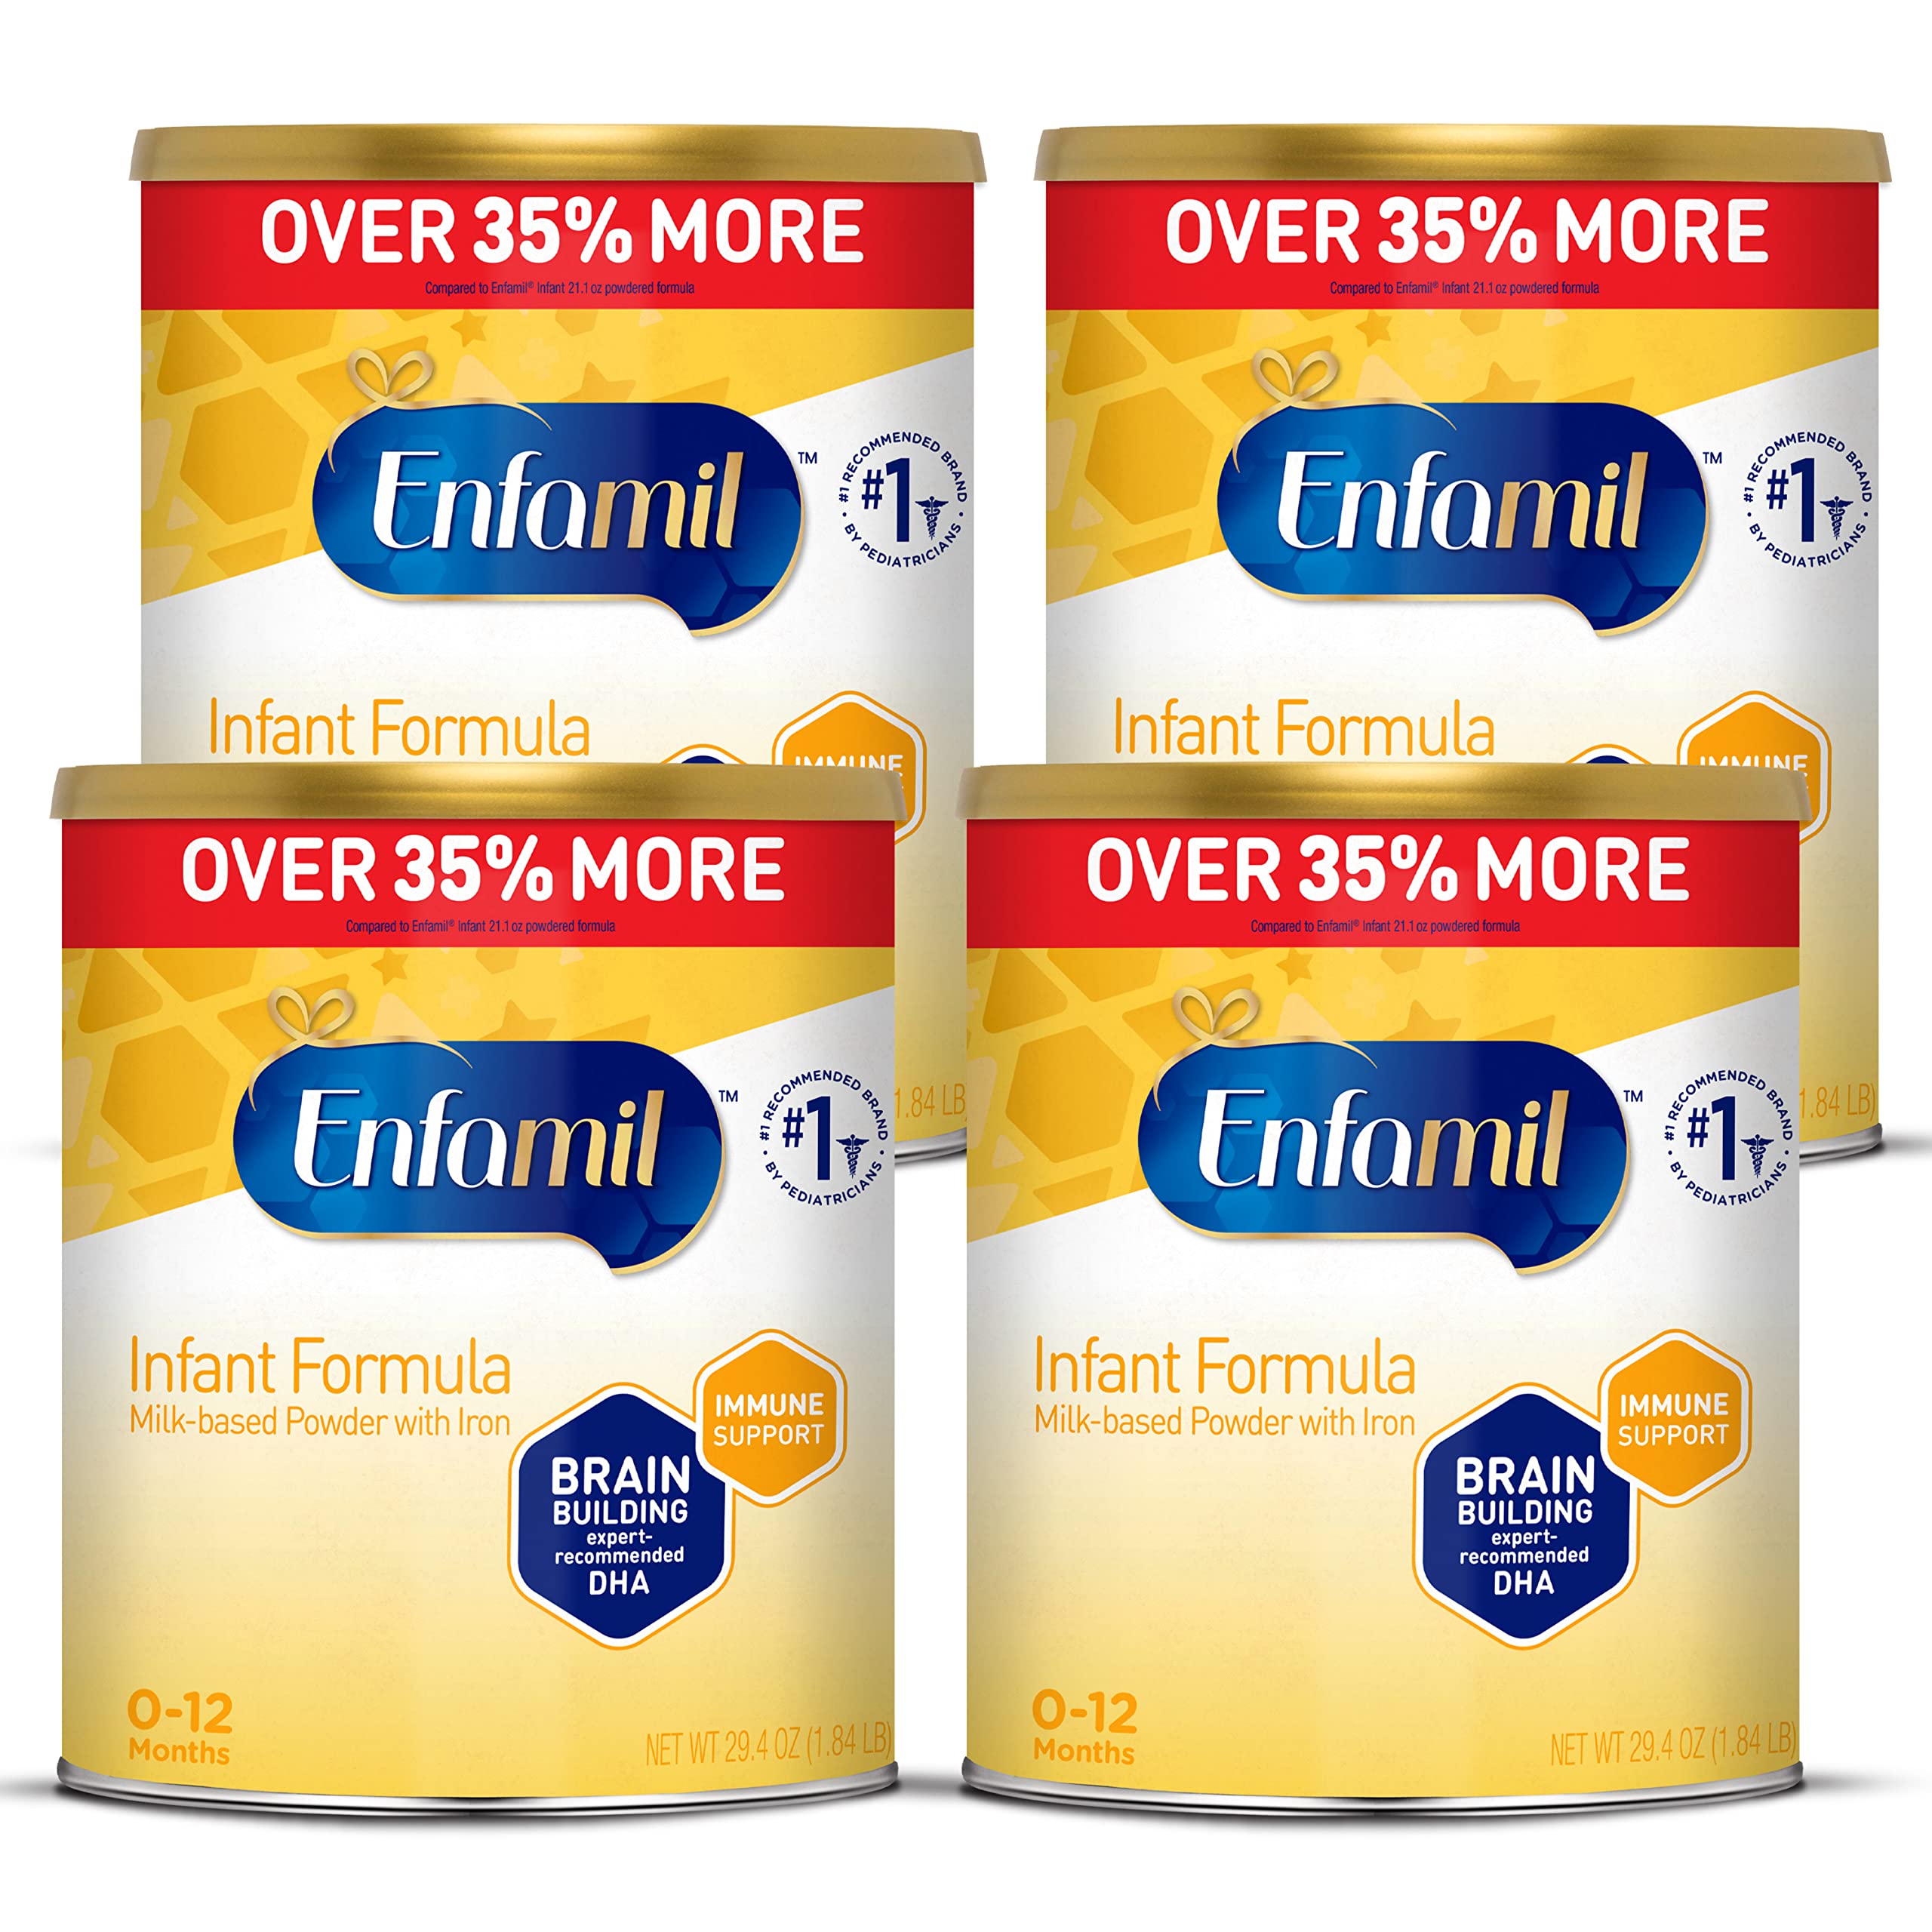 Enfamil Infant Formula - Milk-based Baby Formula with Iron - Powder Can, 29.4 oz (4 Pack) 29.4 oz Can (Pack of 4), Now Only $155.76